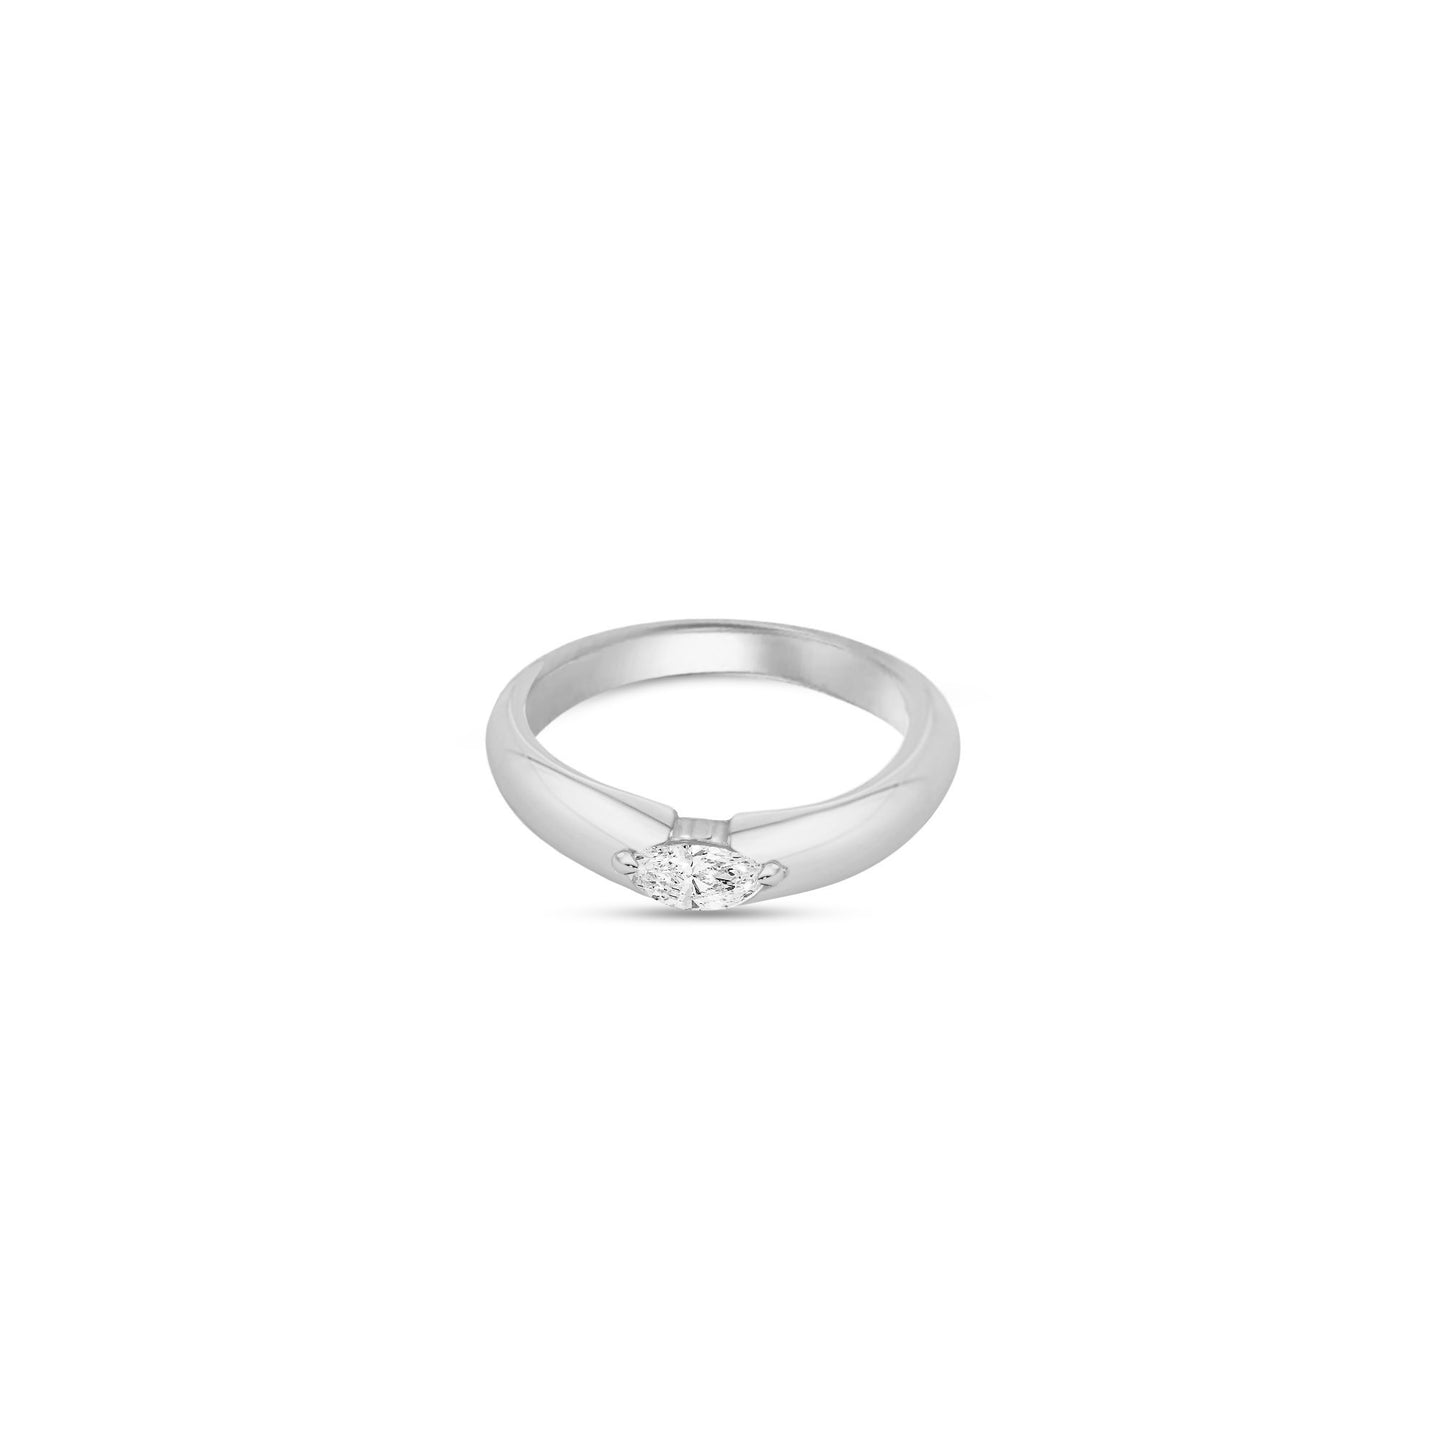 The Tulip Oval Stone Ring